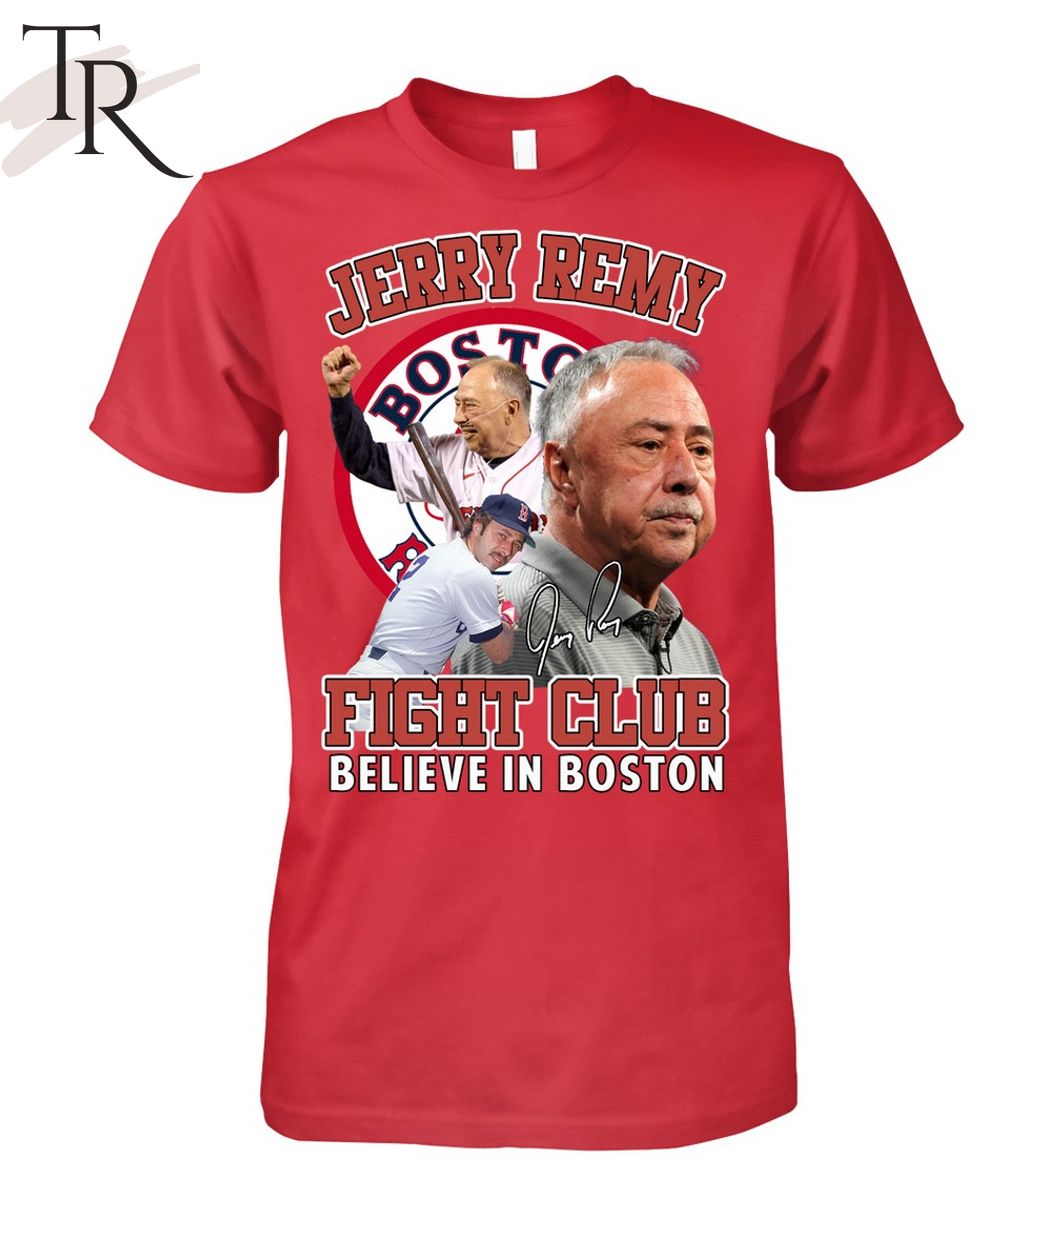 red sox jerry remy shirt